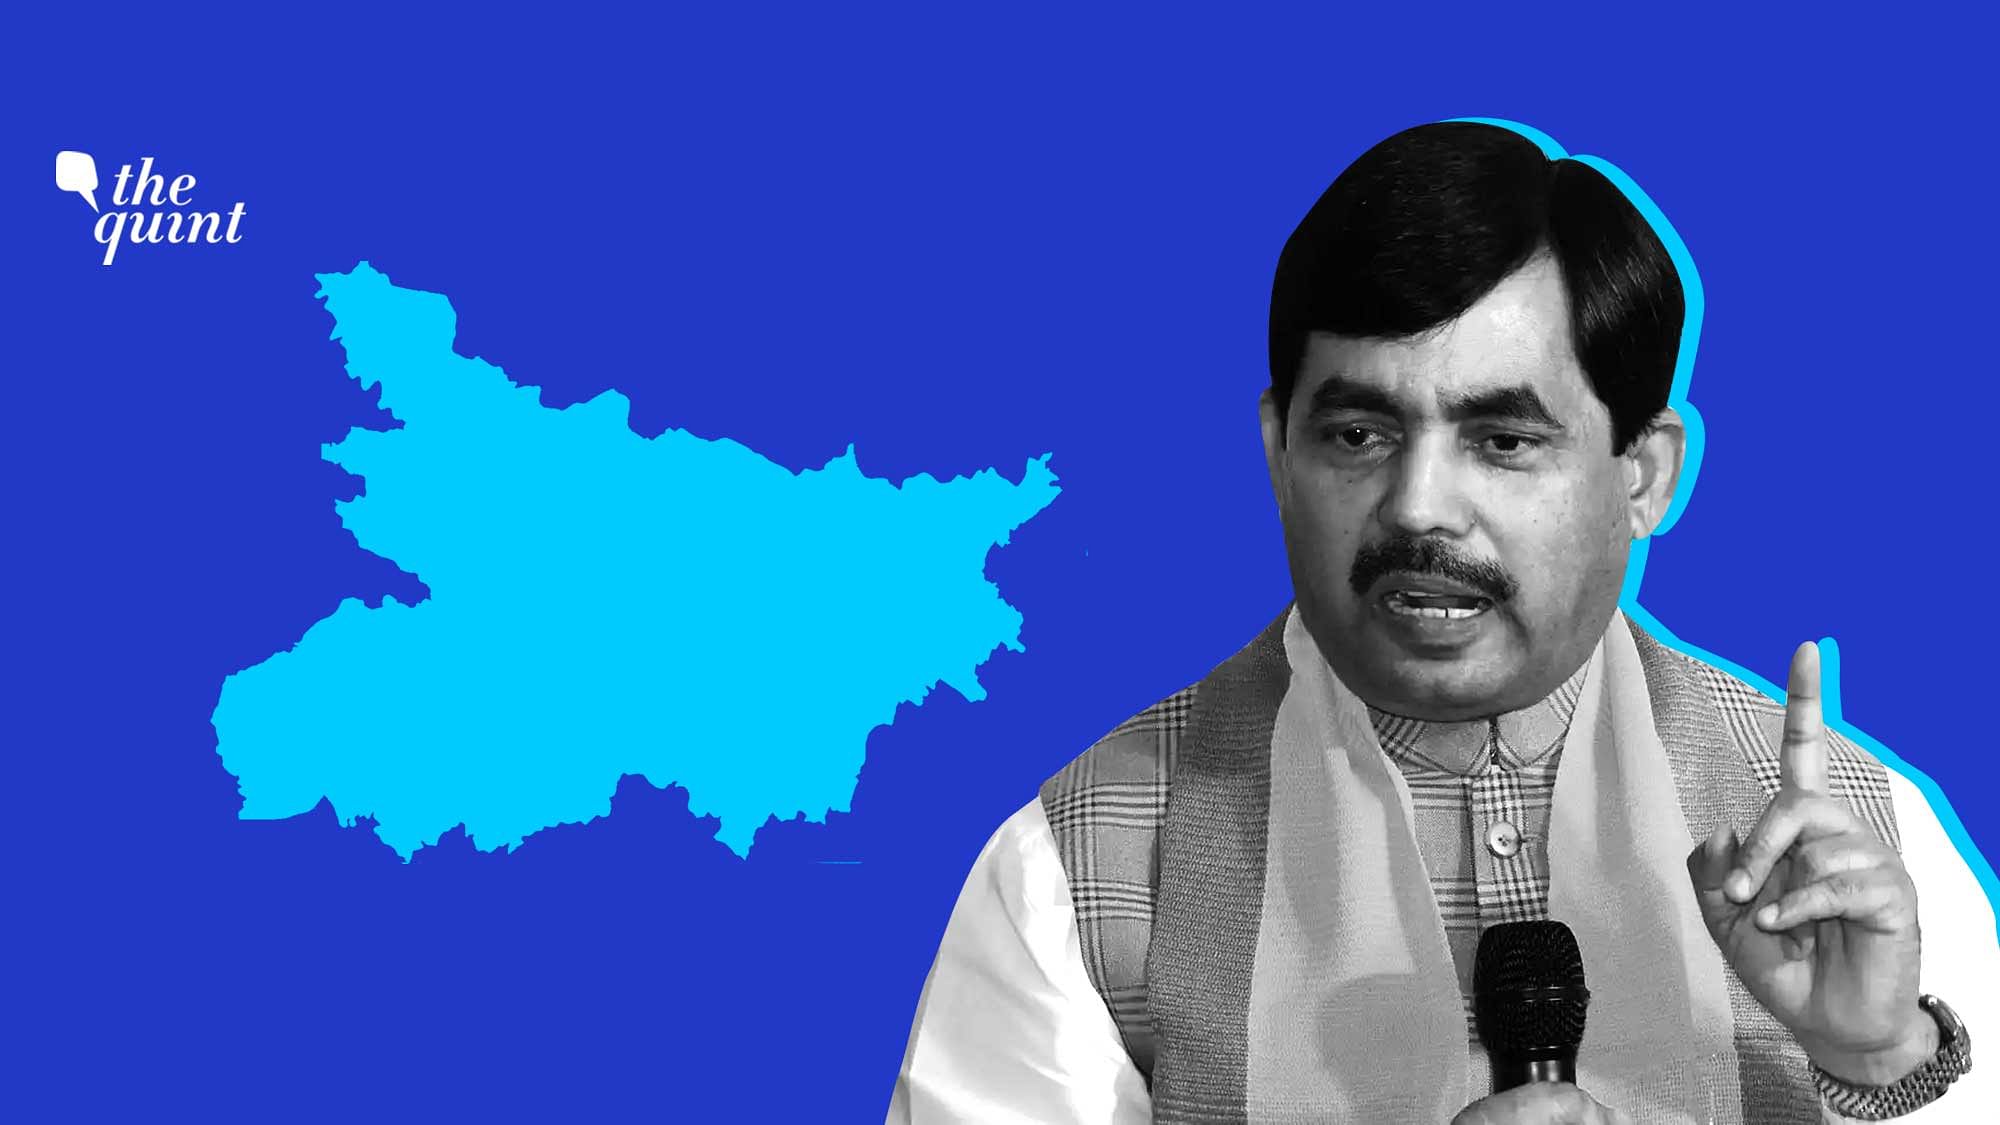 Image of Bihar map and Shahnawaz Hussain used for representational purposes.